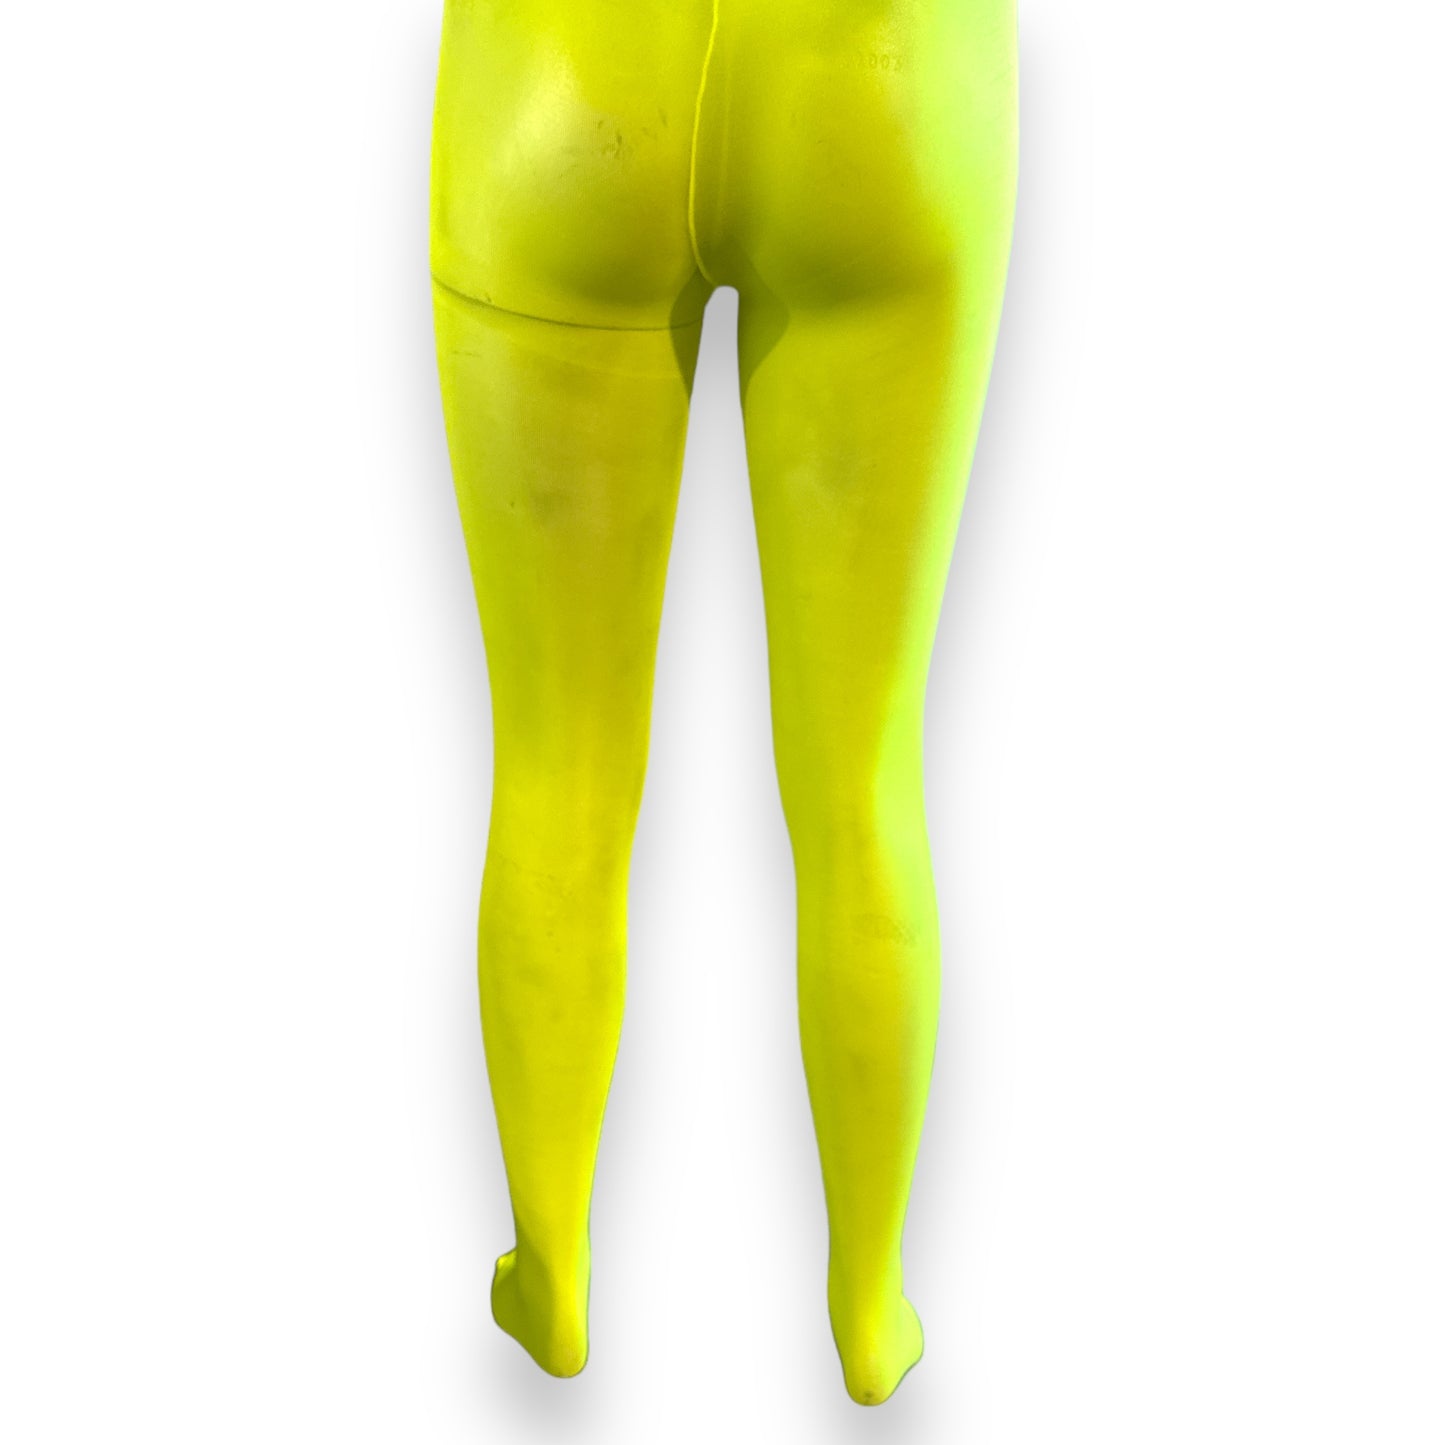 Kinky Pleasure - MP051 - Leggings In Neon Yellow - Available in 2 Sizes